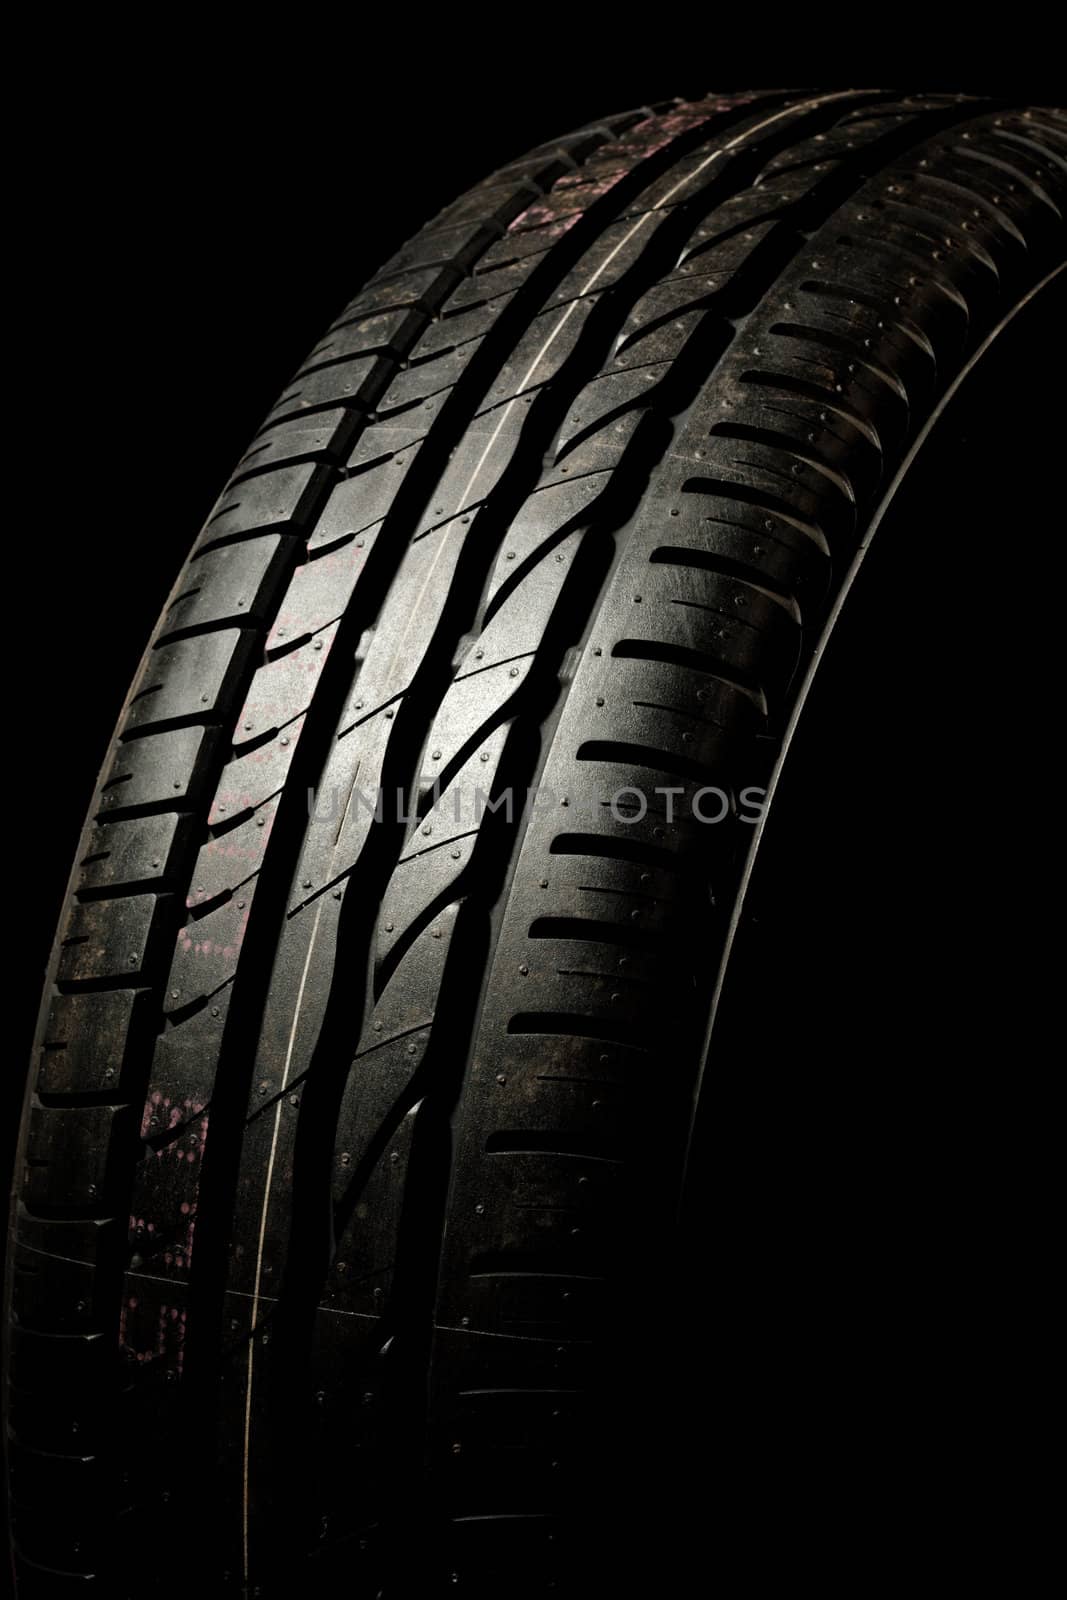 Tire close up by dimol